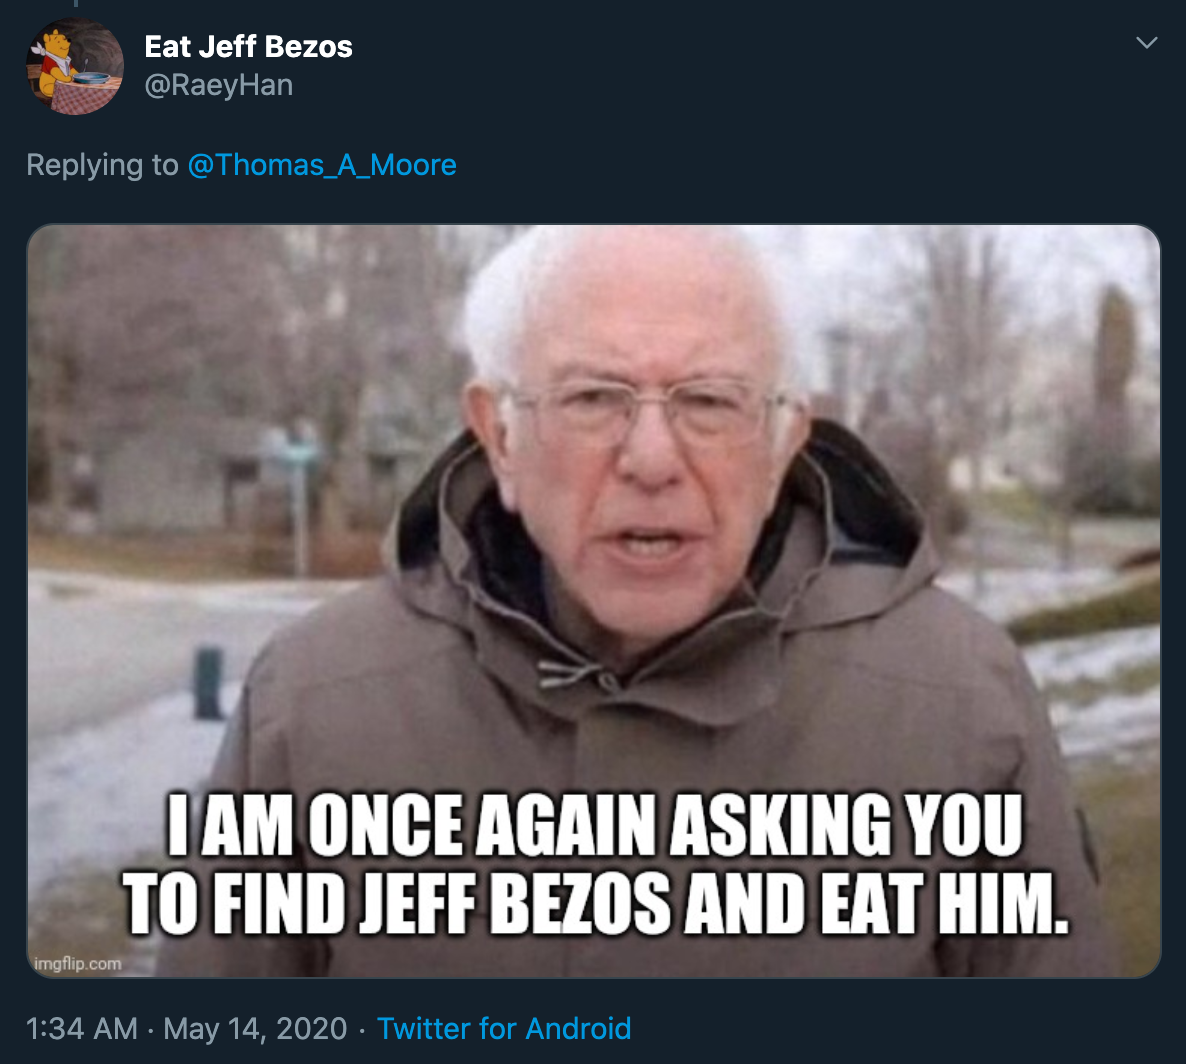 I Am Once Again Asking You To Find Jeff Bezos And Eat Him. bernie sanders campaign meme